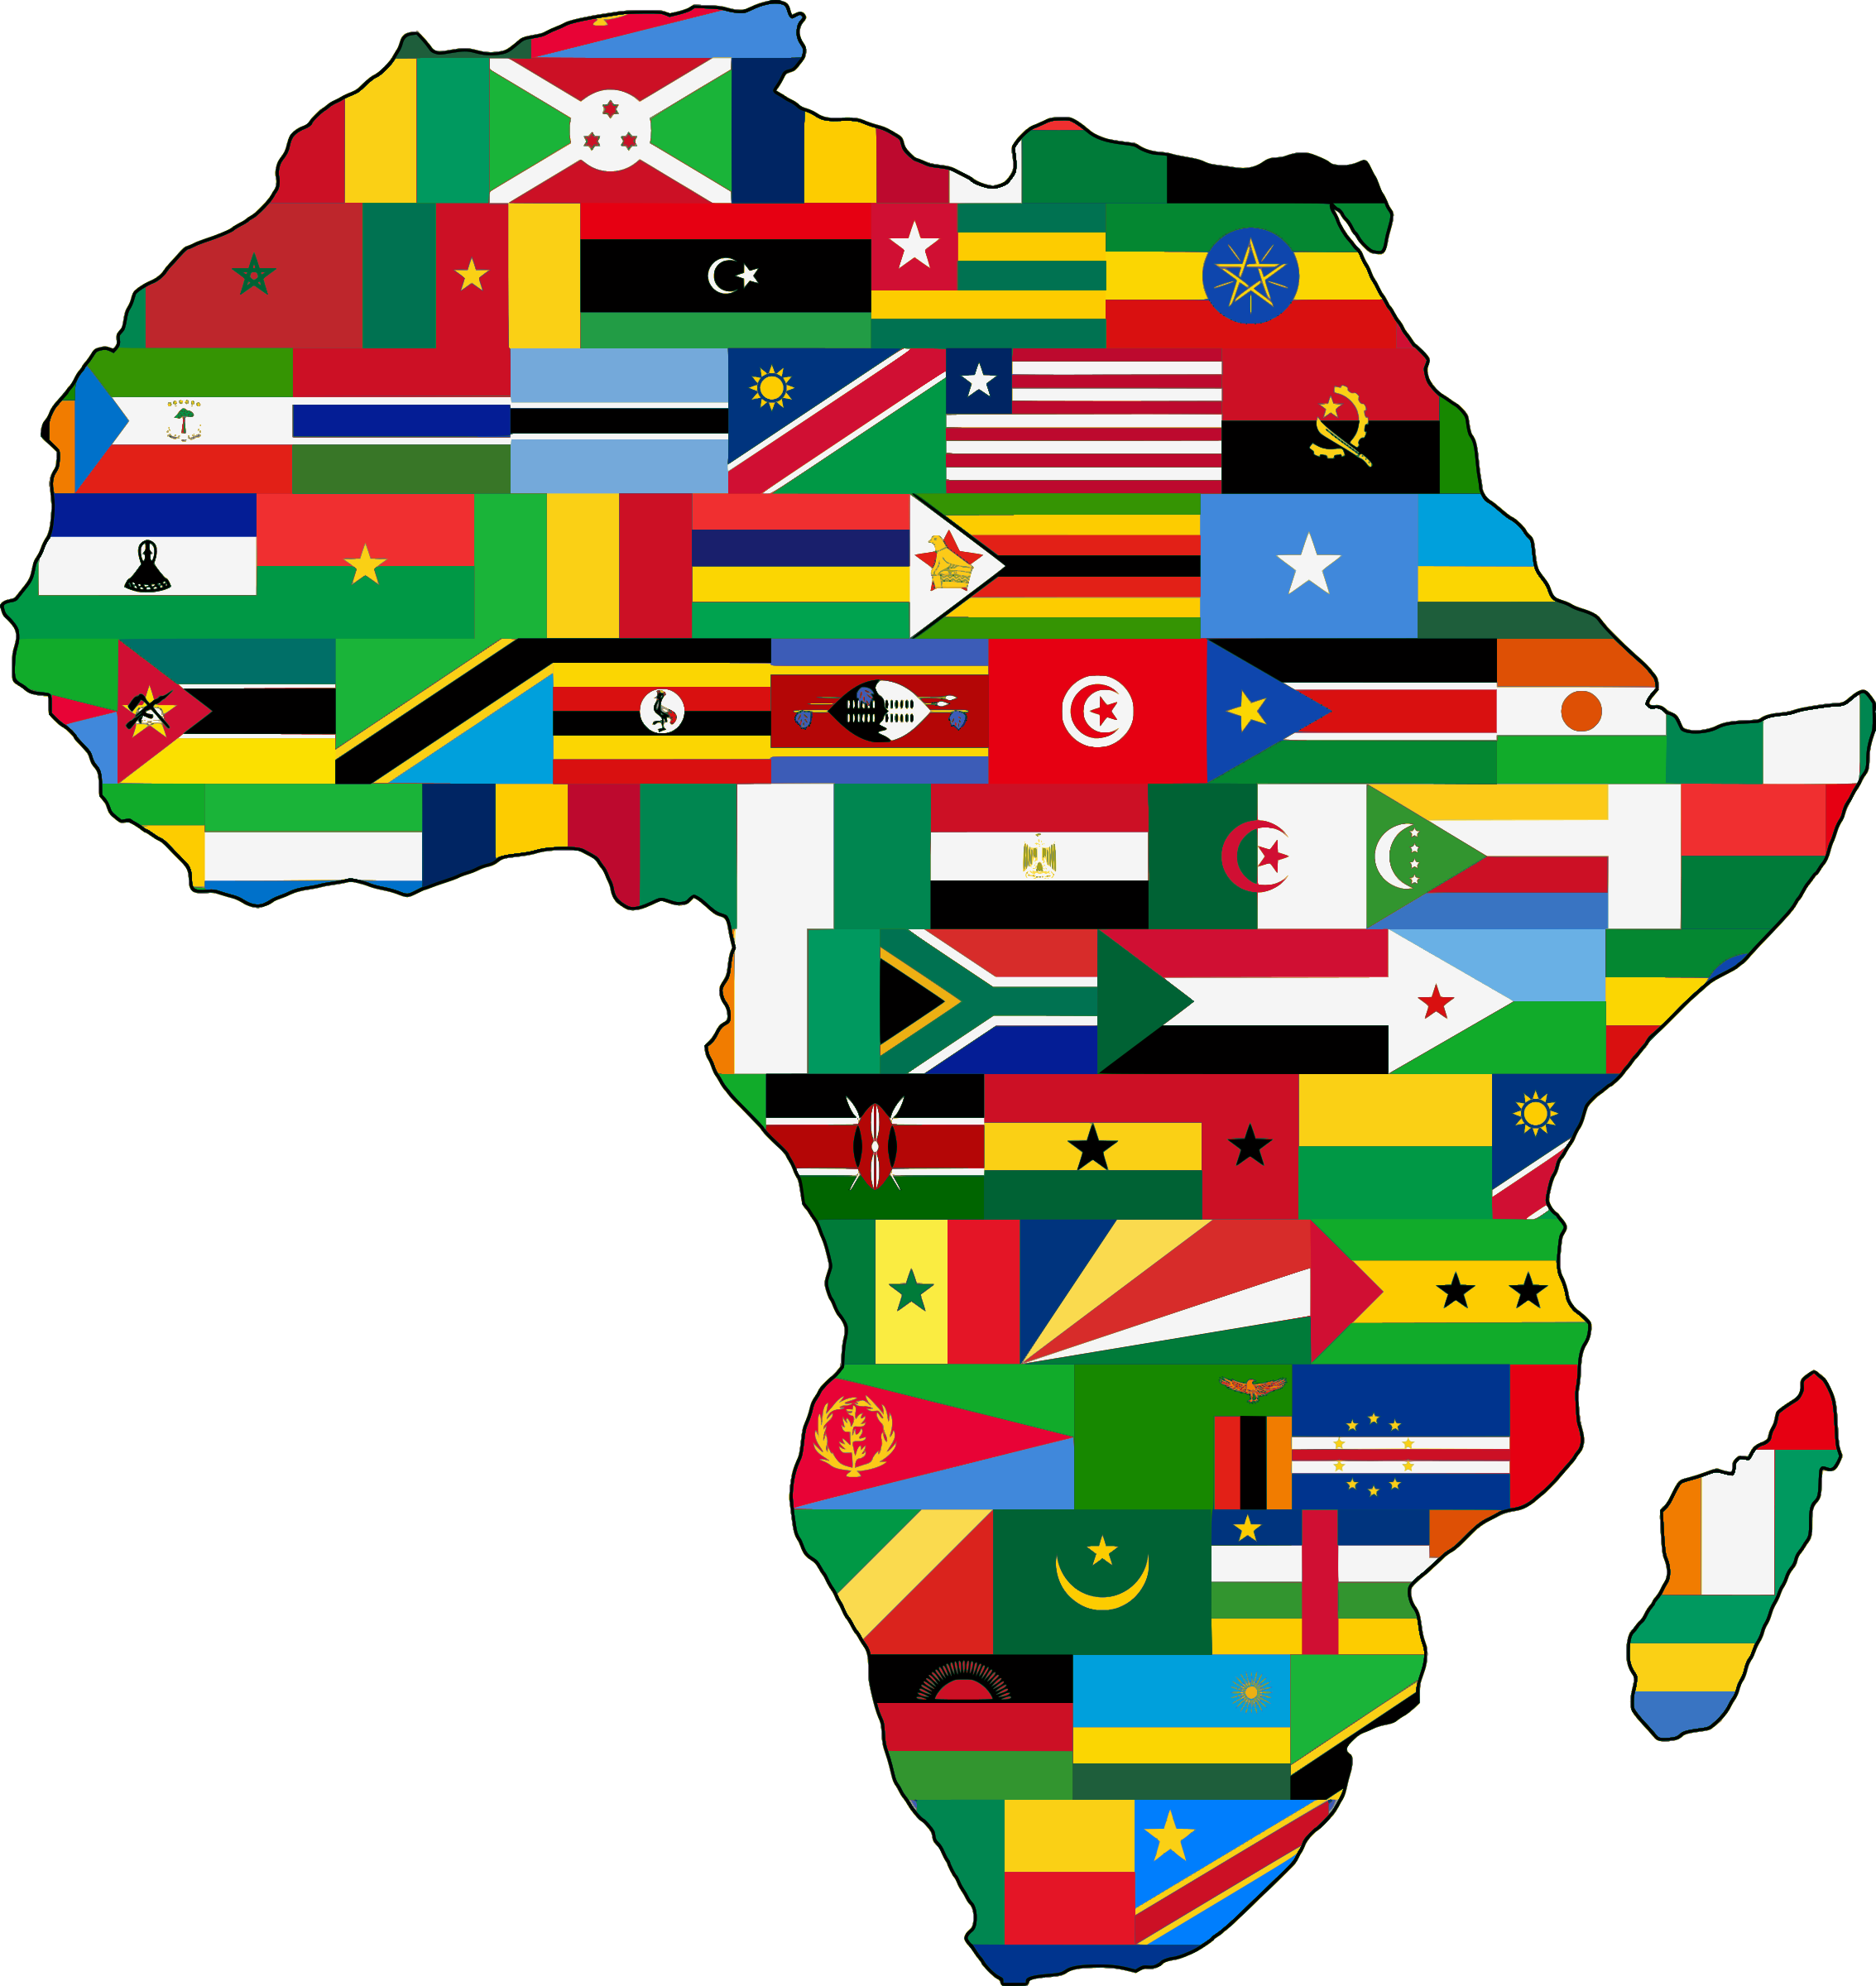 Africa map by flags